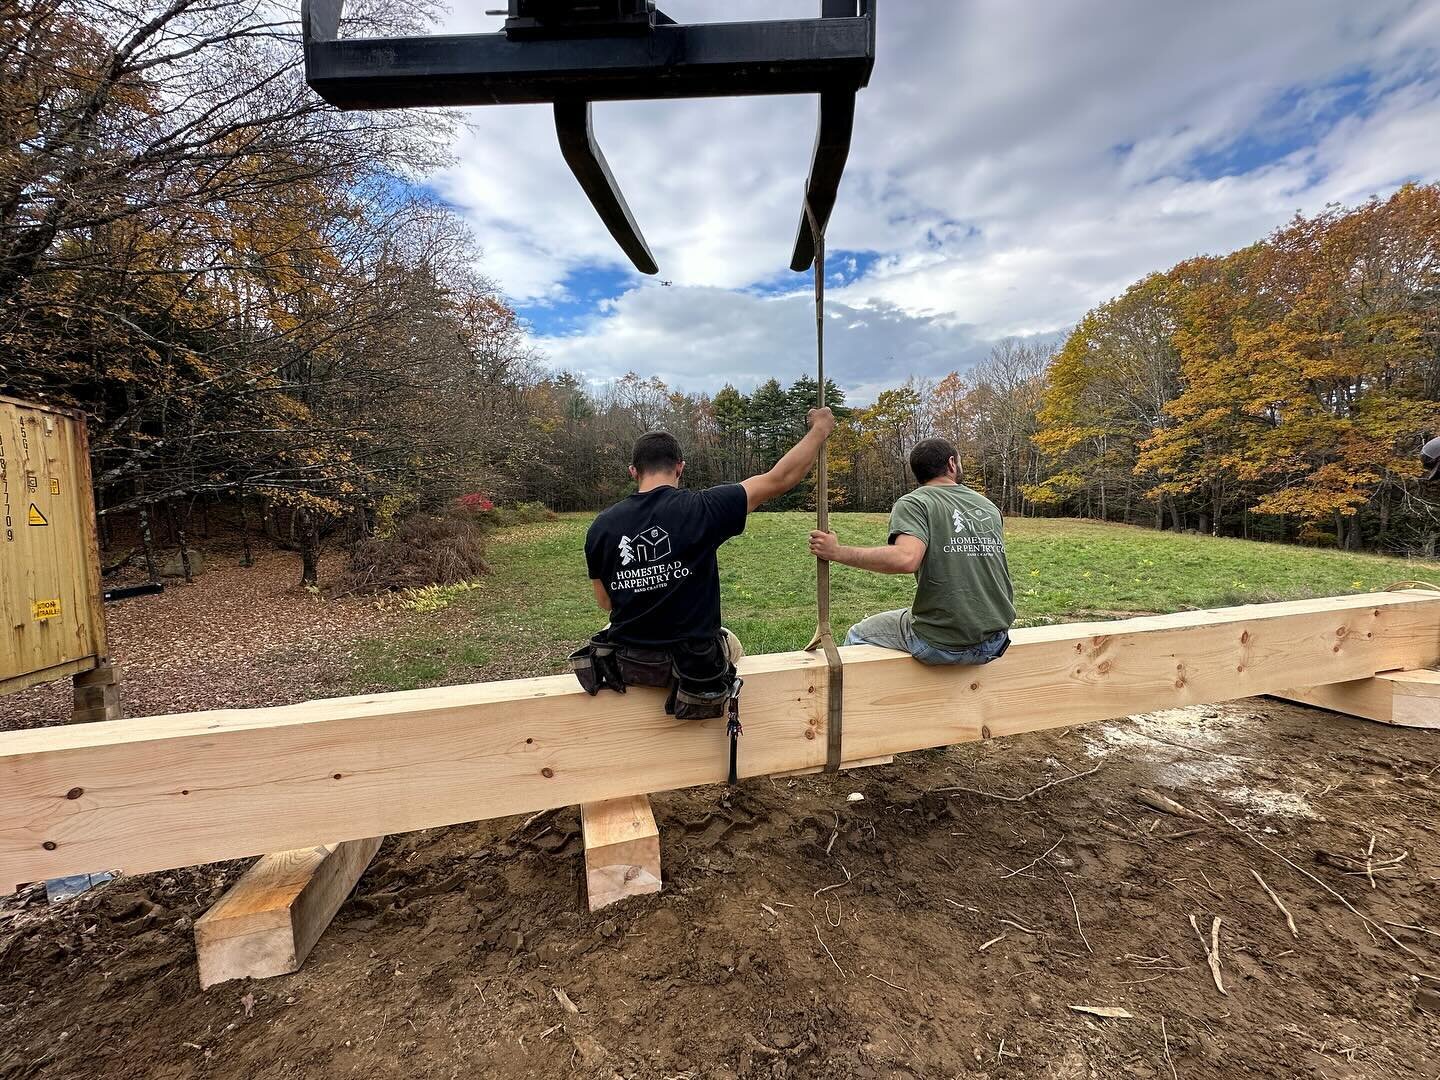 Two timber frame additions we put up in Lake George this summer/fall. It was great working with @pgbsails on this one. 

#homesteadcarpentryco #carpentry #homestead #timberframe #timberframer #timberframehouse #timberframehomes #timberframing #timber